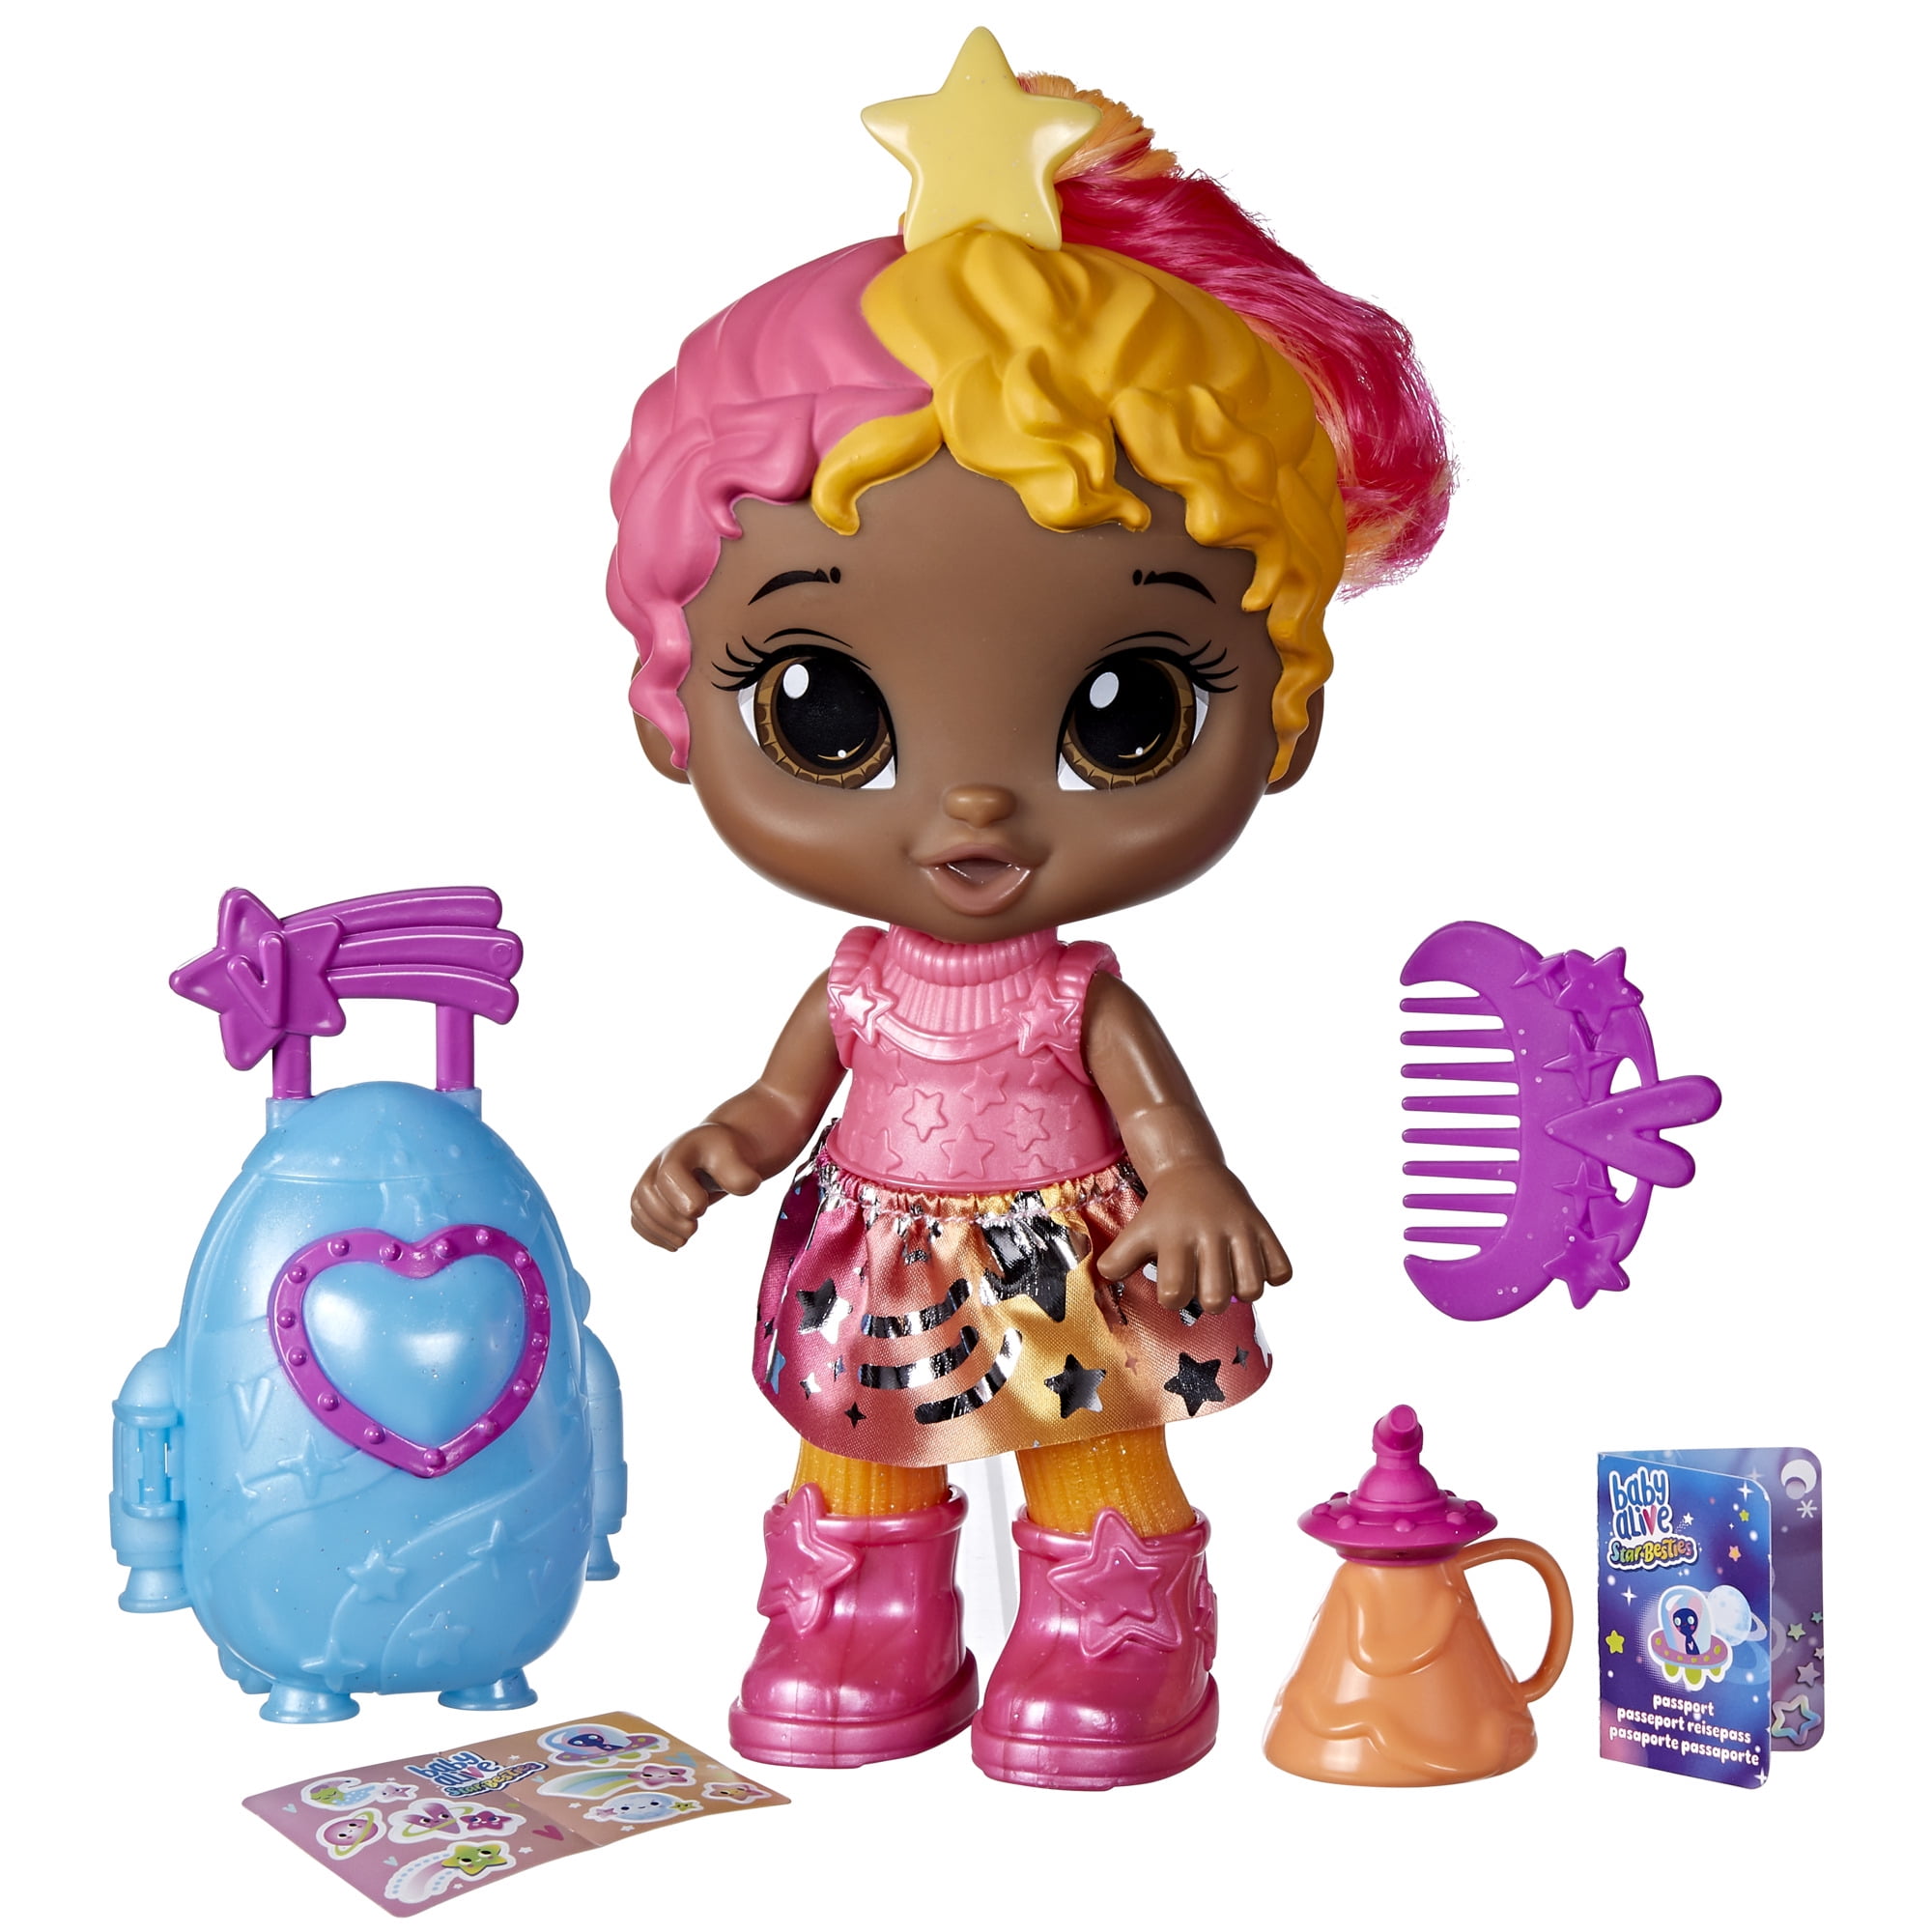 Baby Alive Star Besties Doll, Bright Bella, Space-Themed Baby Alive Doll, Kids 3 and Up